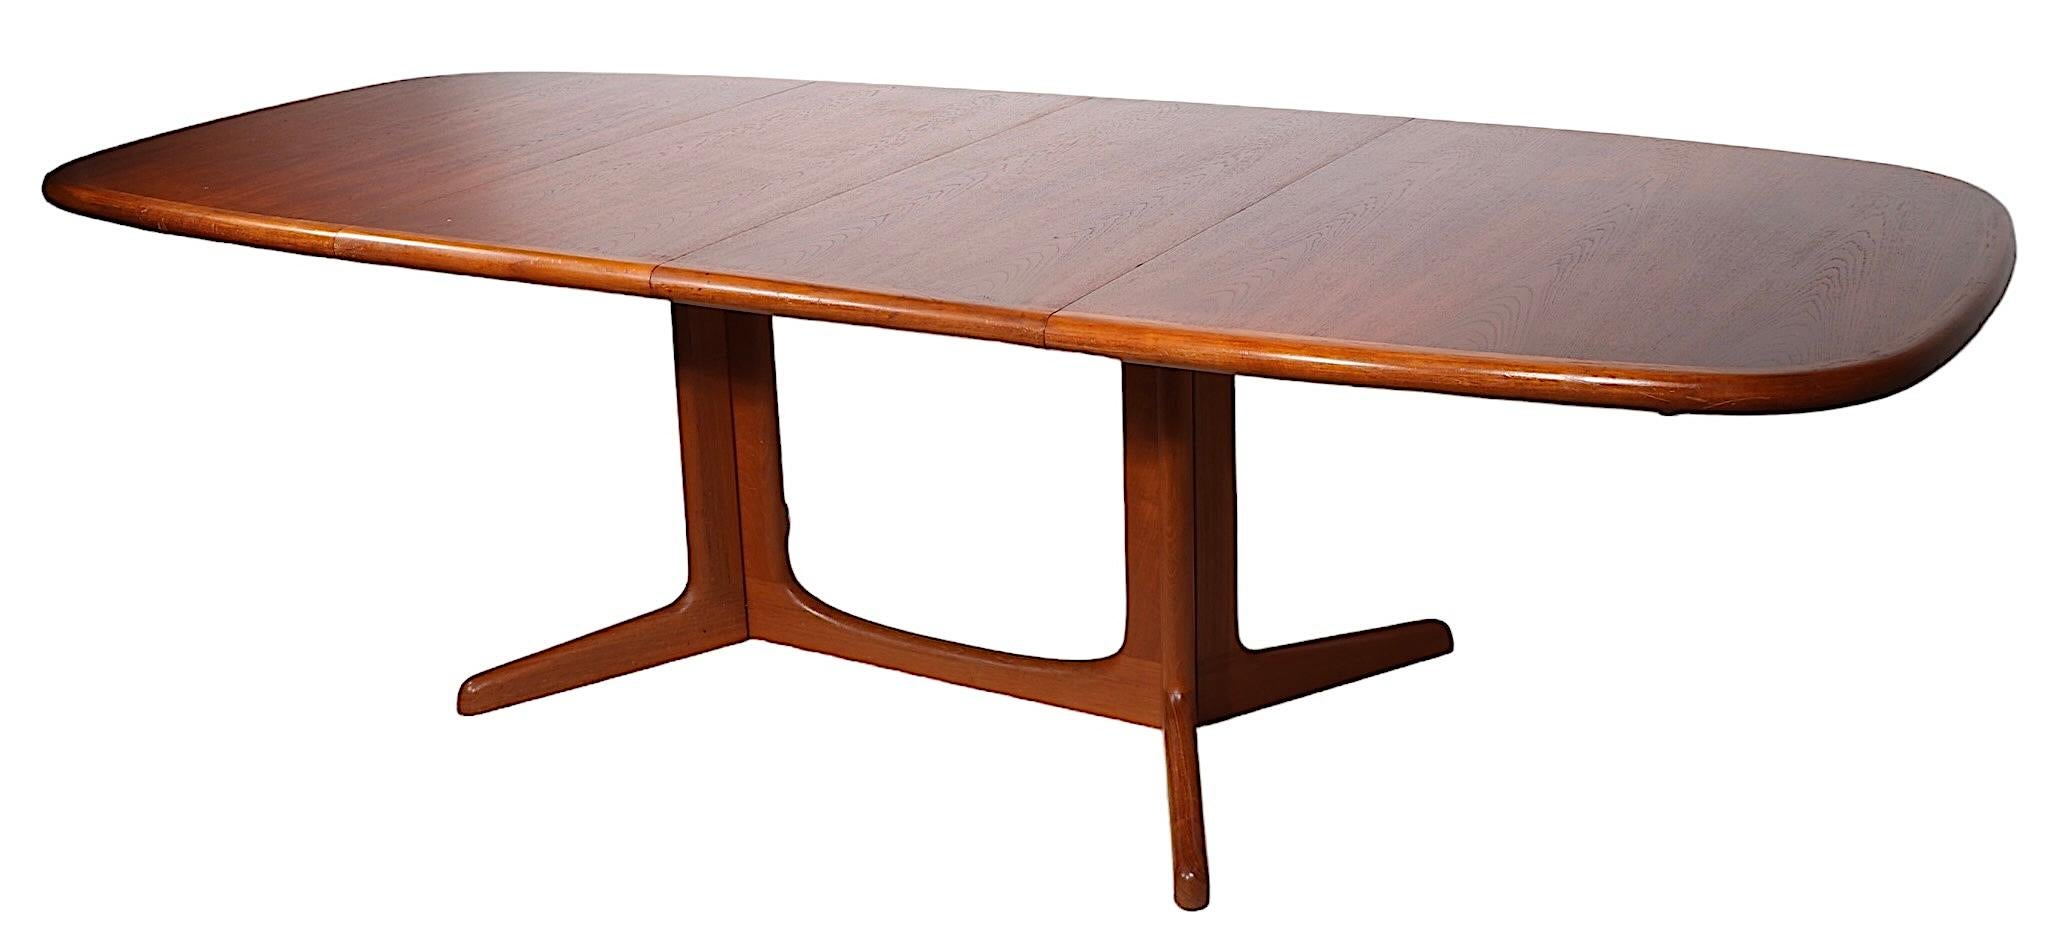 Danish Mid Century Oval Teak Dining Table by Niels Otto Moller for Gudme c 1970s For Sale 3